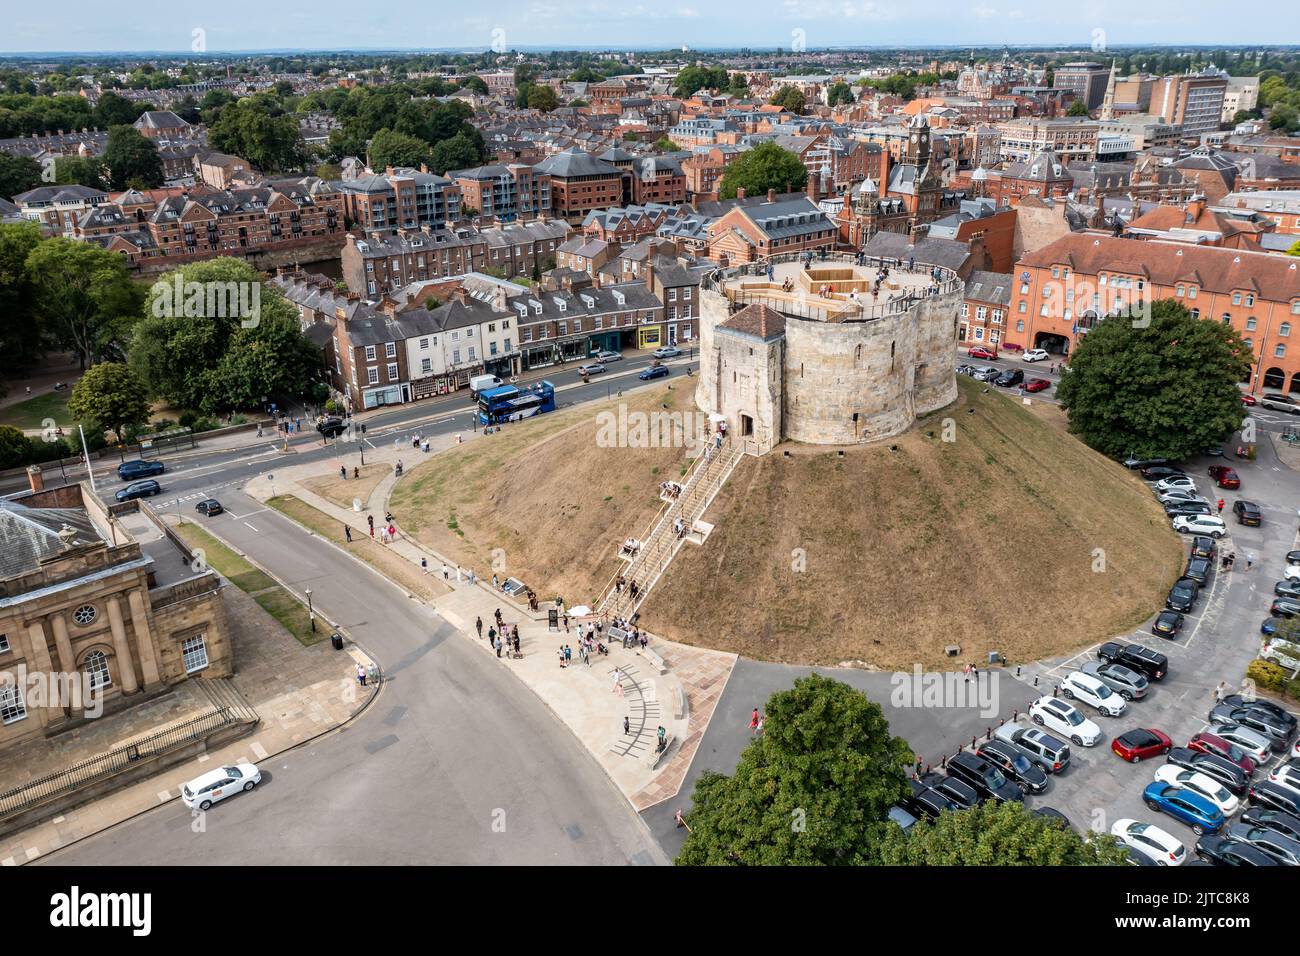 YORK, UK - AUGUST 28, 2022.  An aerial view of the historic and ancient architecture of Cliffords Tower in York. Stock Photo